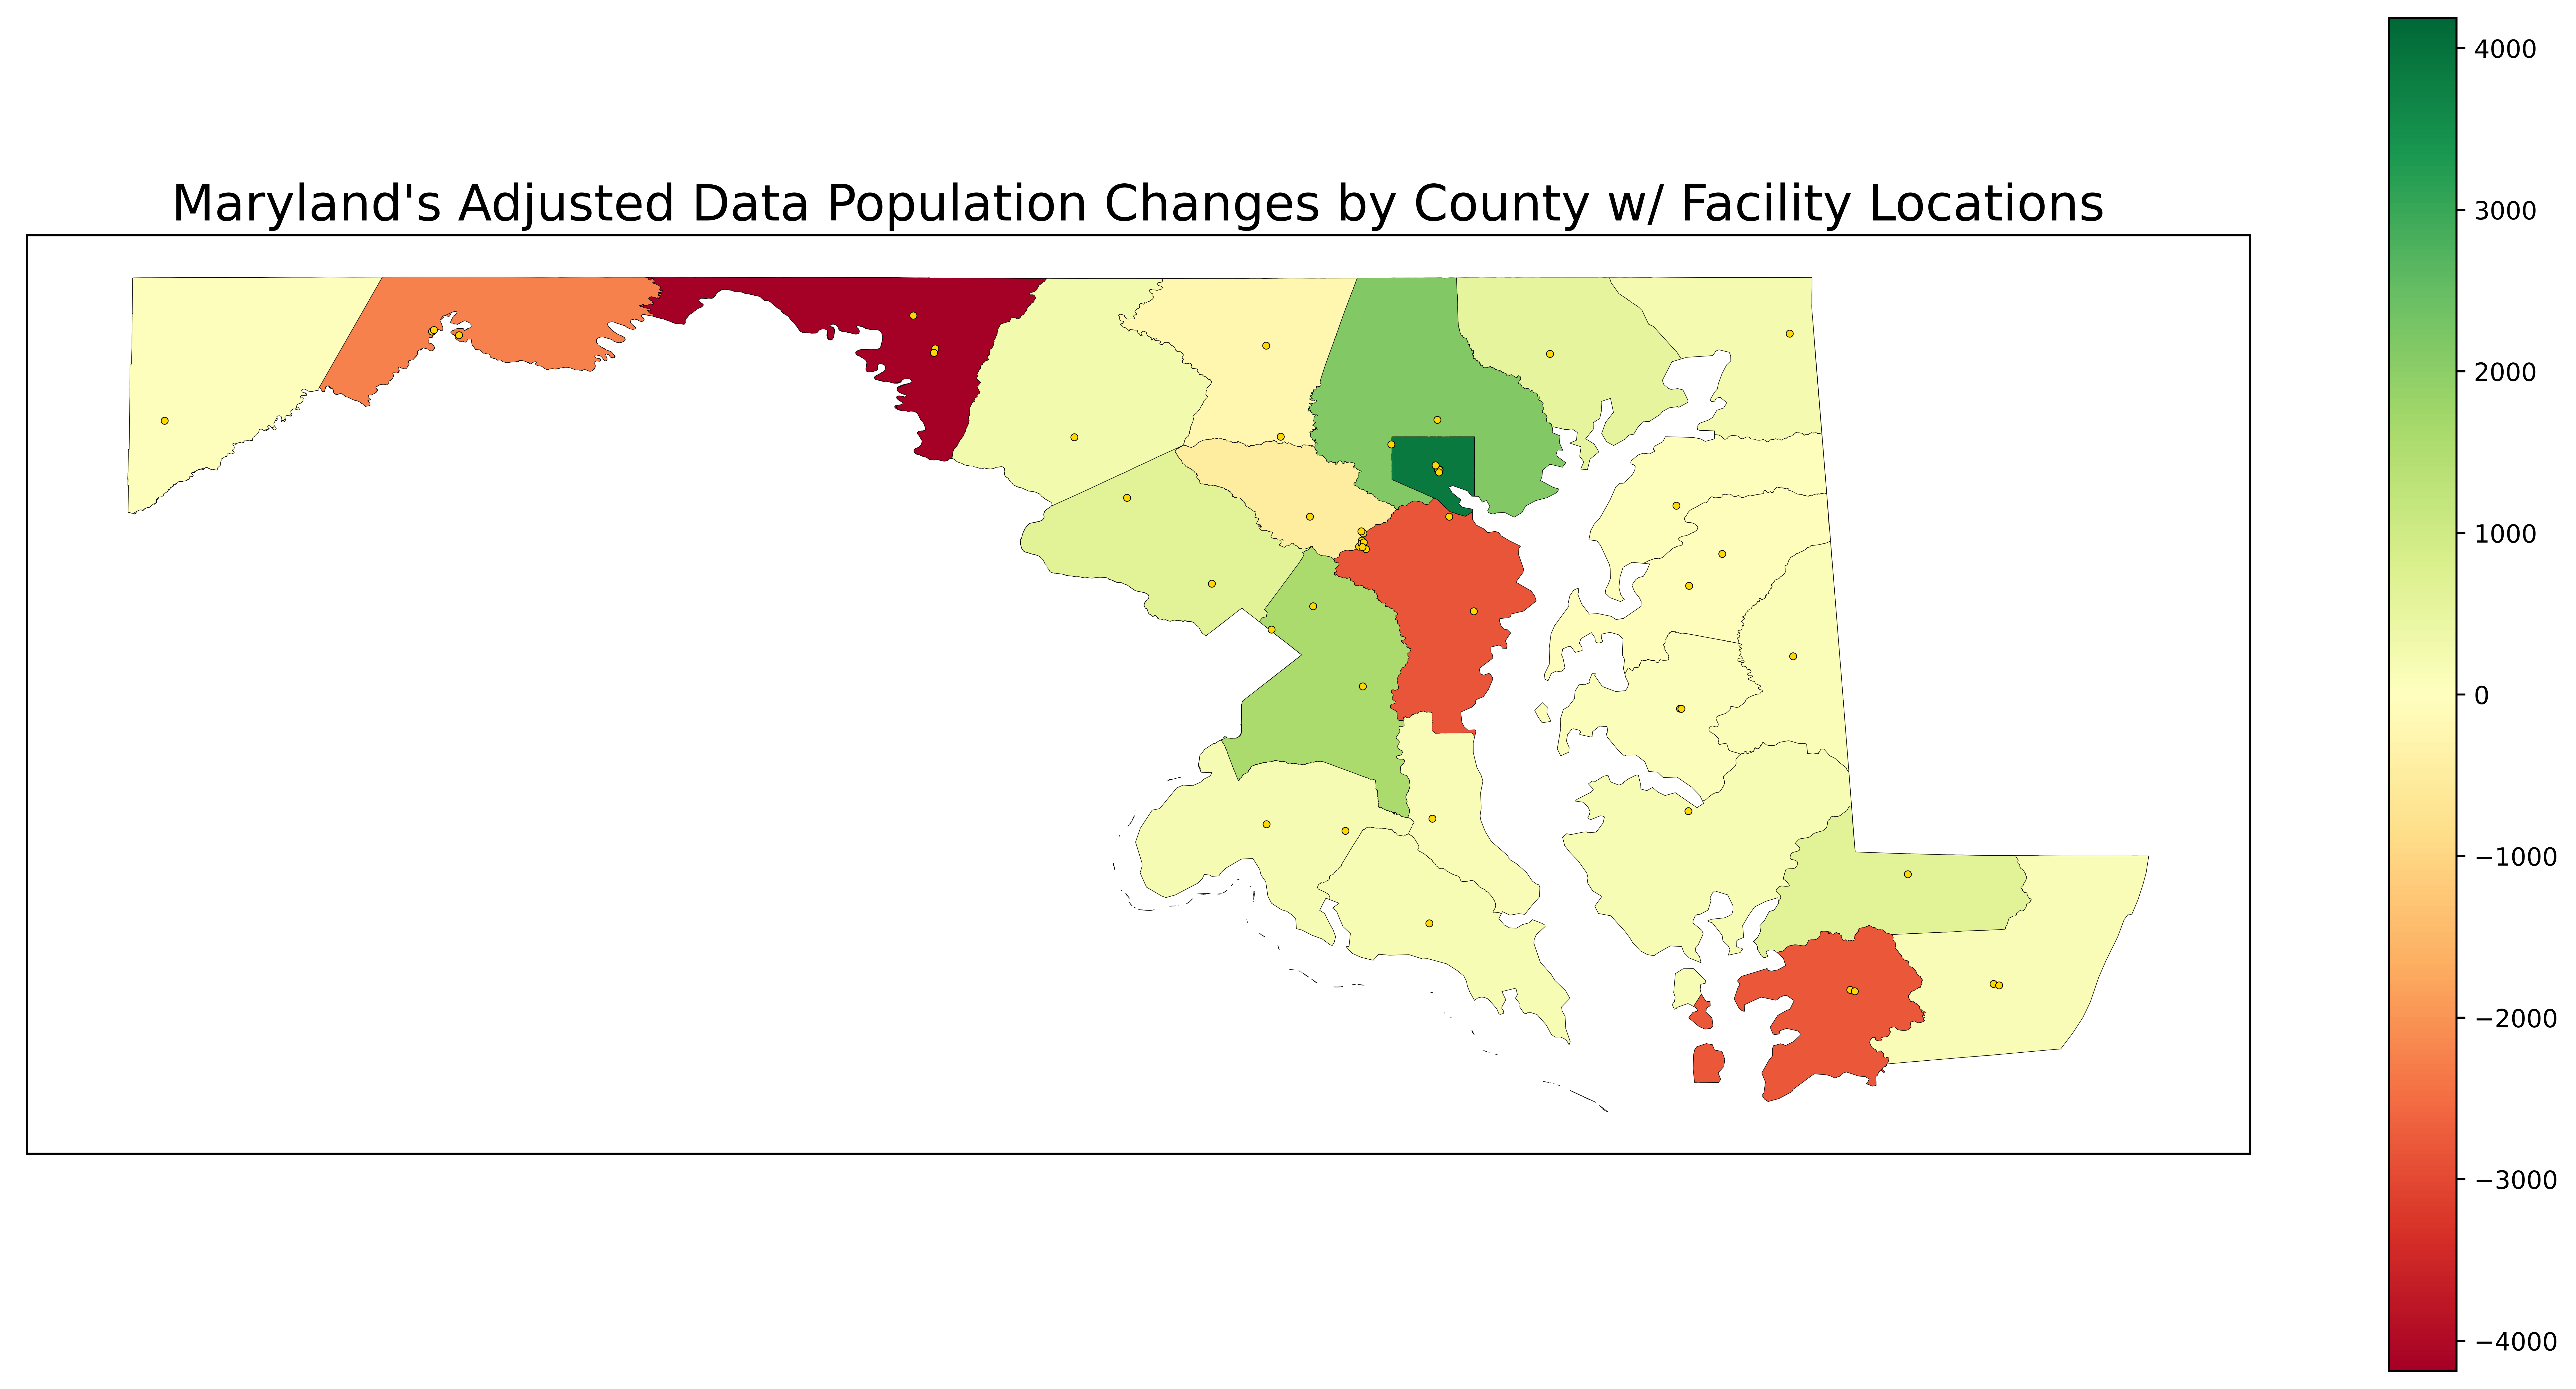 Maryland's Adjusted Data Population Changes by County with Facility Locations